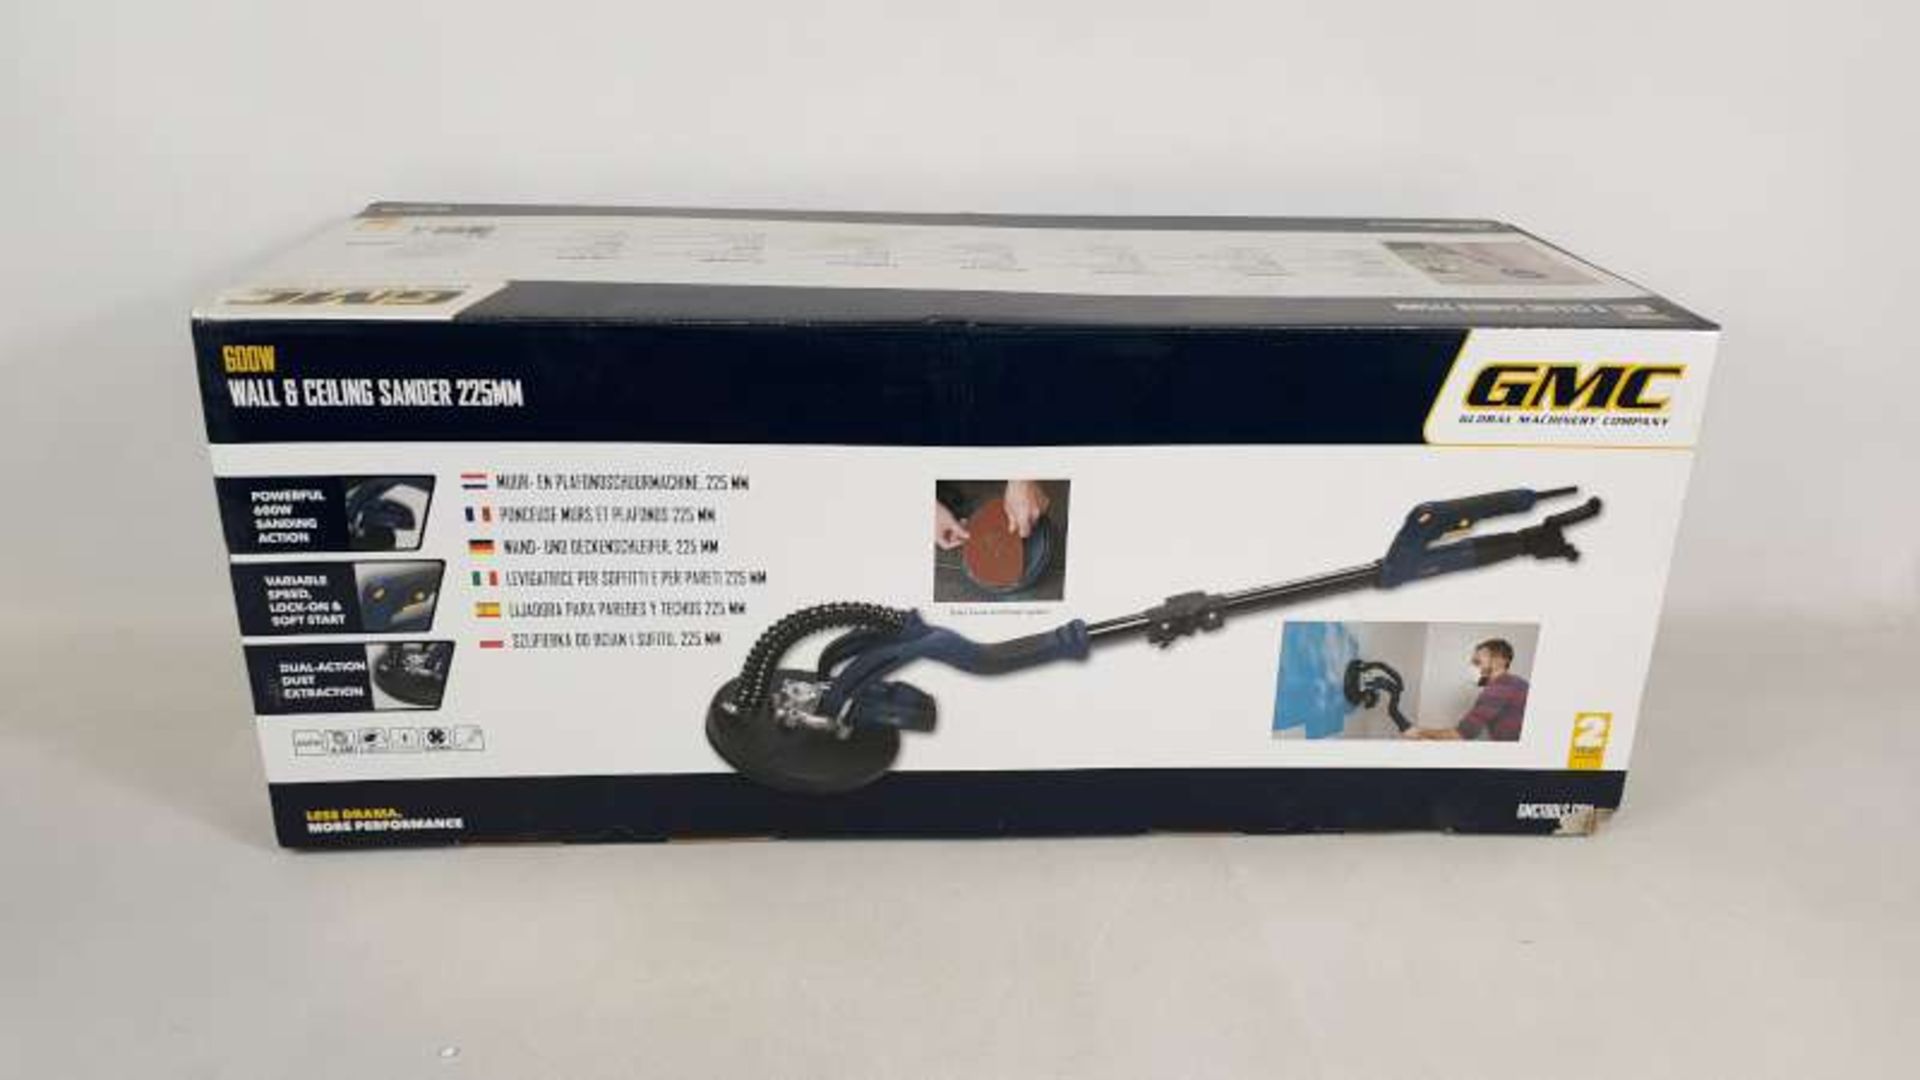 BRAND NEW BOXED 600W WALL AND CEILING SANDER 225MM WITH 2 YEAR MANUFACTURERS GUARANTEE